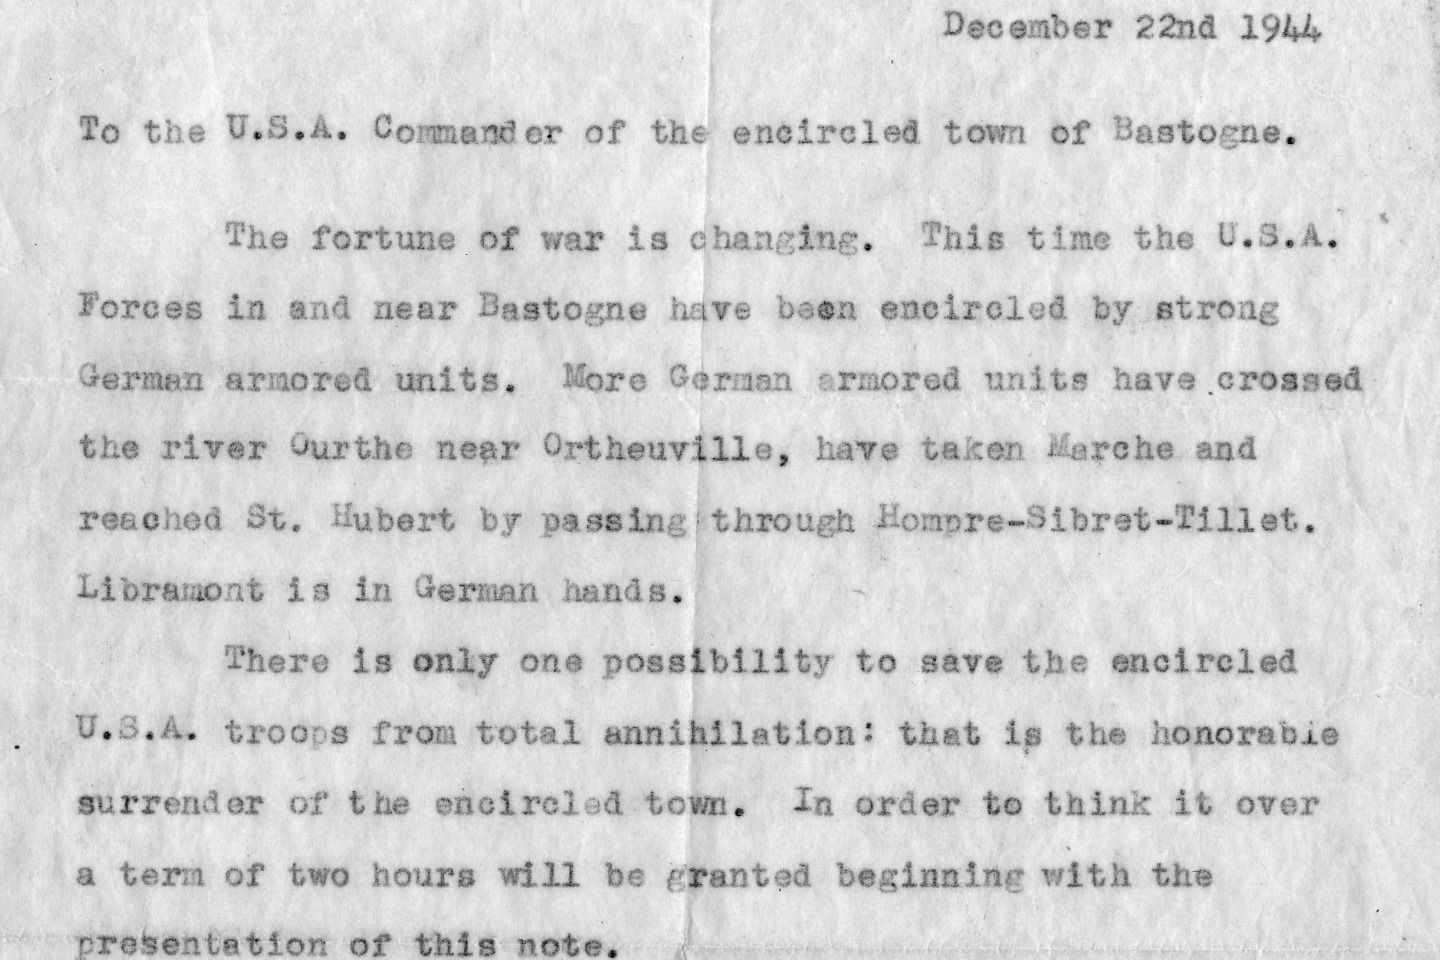 https://www.army.mil/article/92856/the_story_of_the_nuts_reply
December 22nd 1944

To the U.S.A. Commander of the encircled town of Bastogne.

The fortune of war is changing. This time the U.S.A.
forces in and near Bastogne have been encircled by strong
German armored units. More German armored units have crossed
the river Ourthe near Ortheuville, have taken Marche and
reached St. Hubert by passing through Hompre-Sibret-Tillet.
Libramont is in German hands.
There is only one possibility to save the encircled
U.S.A troops from total annihilation: that is the honorable
surrender of the encircled town. In order to think it over
a term of two hours will be granted beginning with the
presentation of this note.
If this proposal should be rejected one German
Artillery Corps and six heavy A. A. Battalions are ready
to annihilate the U.S.A. troops in and near Bastogne. The
order for firing will be given immediately after this two
hours' term.
All the serious civilian losses caused by this
artillery fire would not correspond with the wellknown
American humanity.

The German Commander.